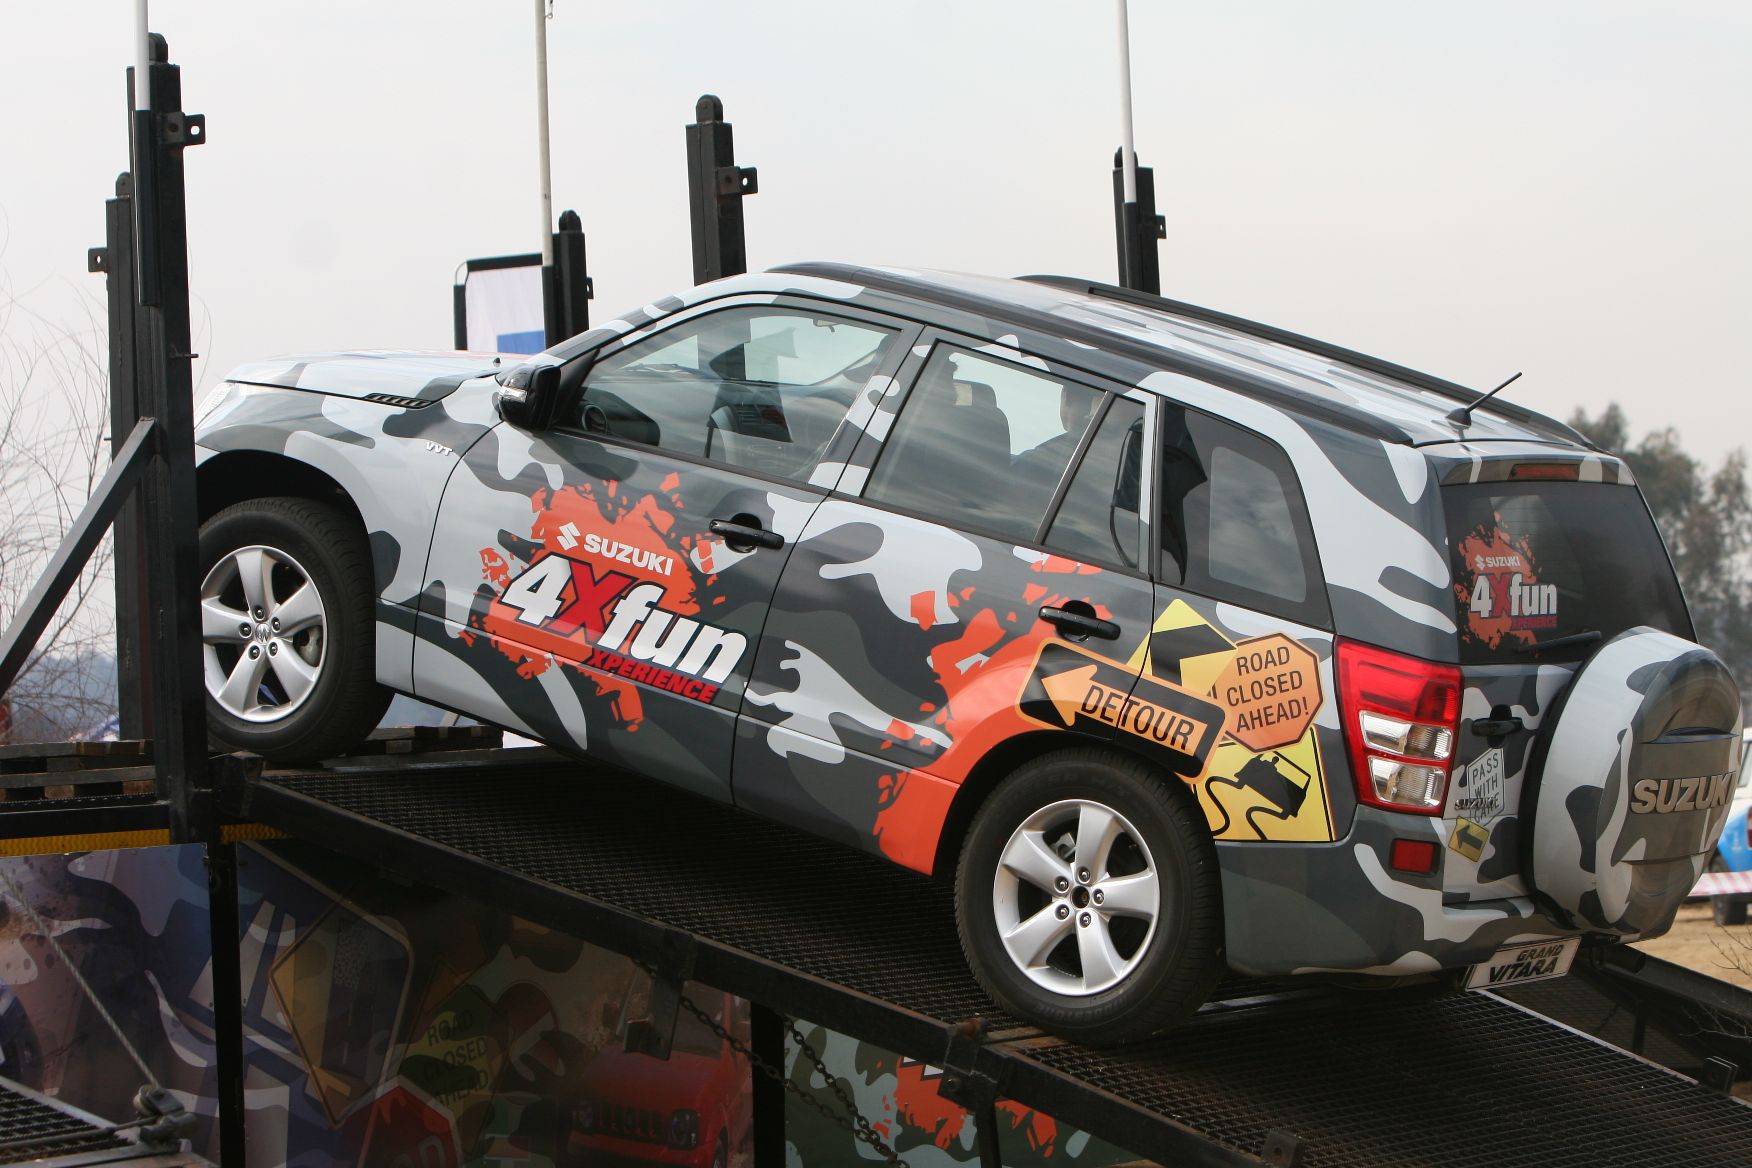 SET TO SHOCK: The Suzuki Rockin' Roadshow an its fun vehicles will be part of the Top Gear Festival at Kyalami.